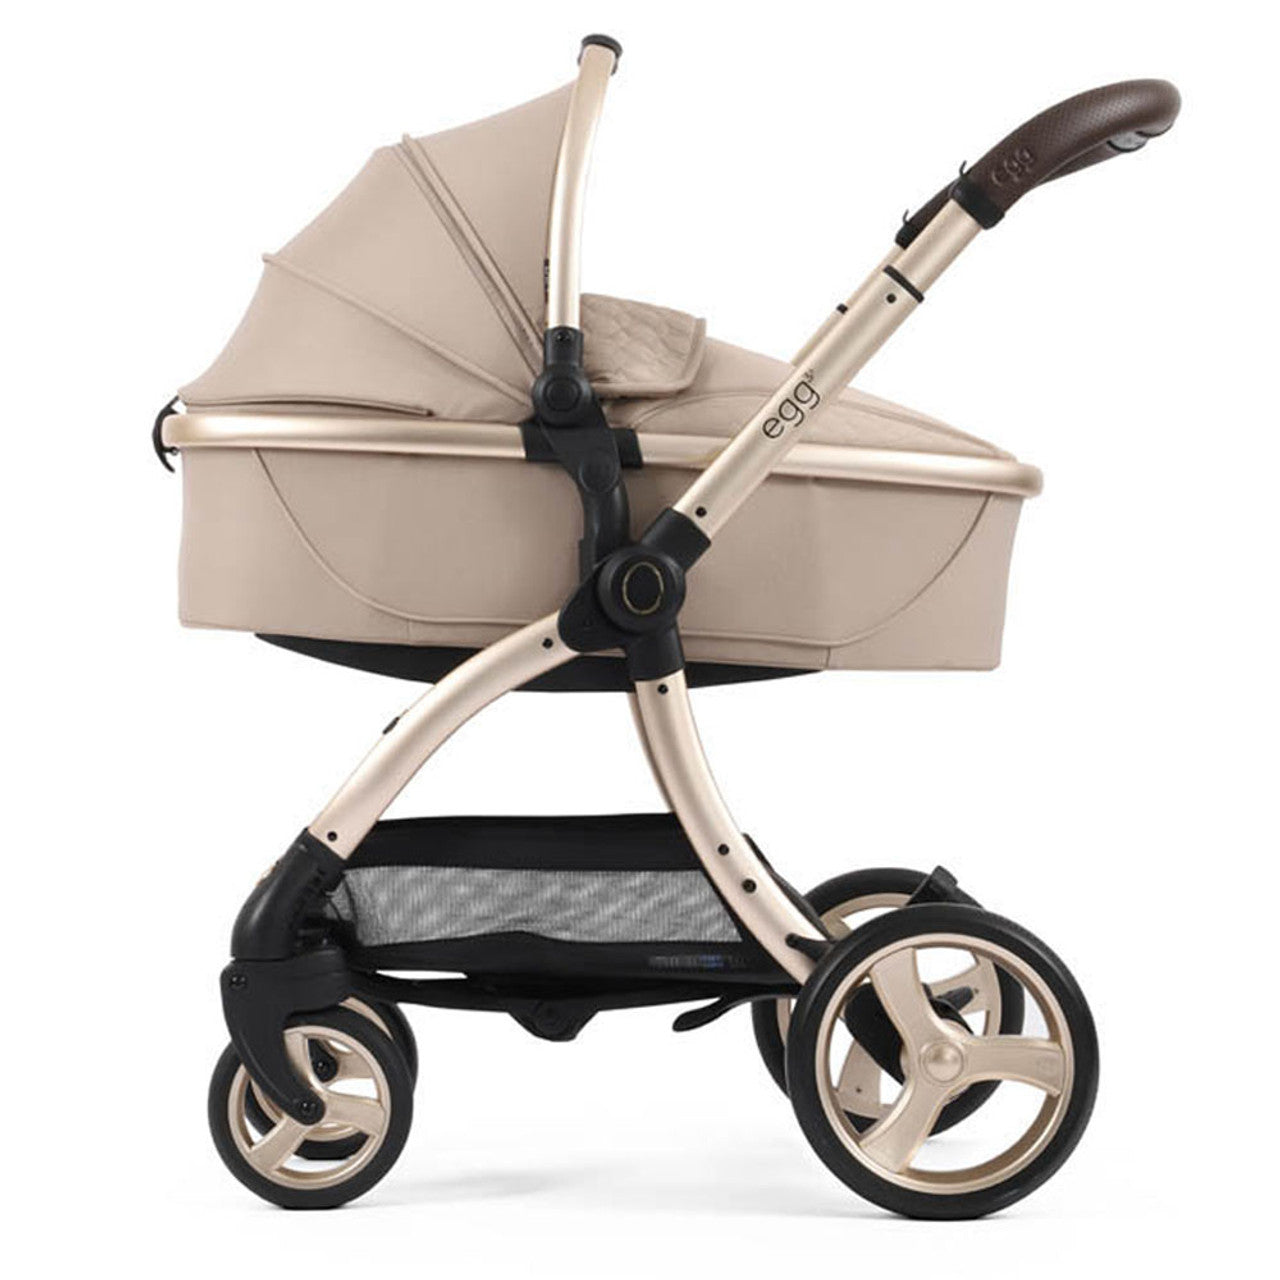 Egg® 3 Luxury Cloud T i-Size Travel System Bundle - Feather -  | For Your Little One